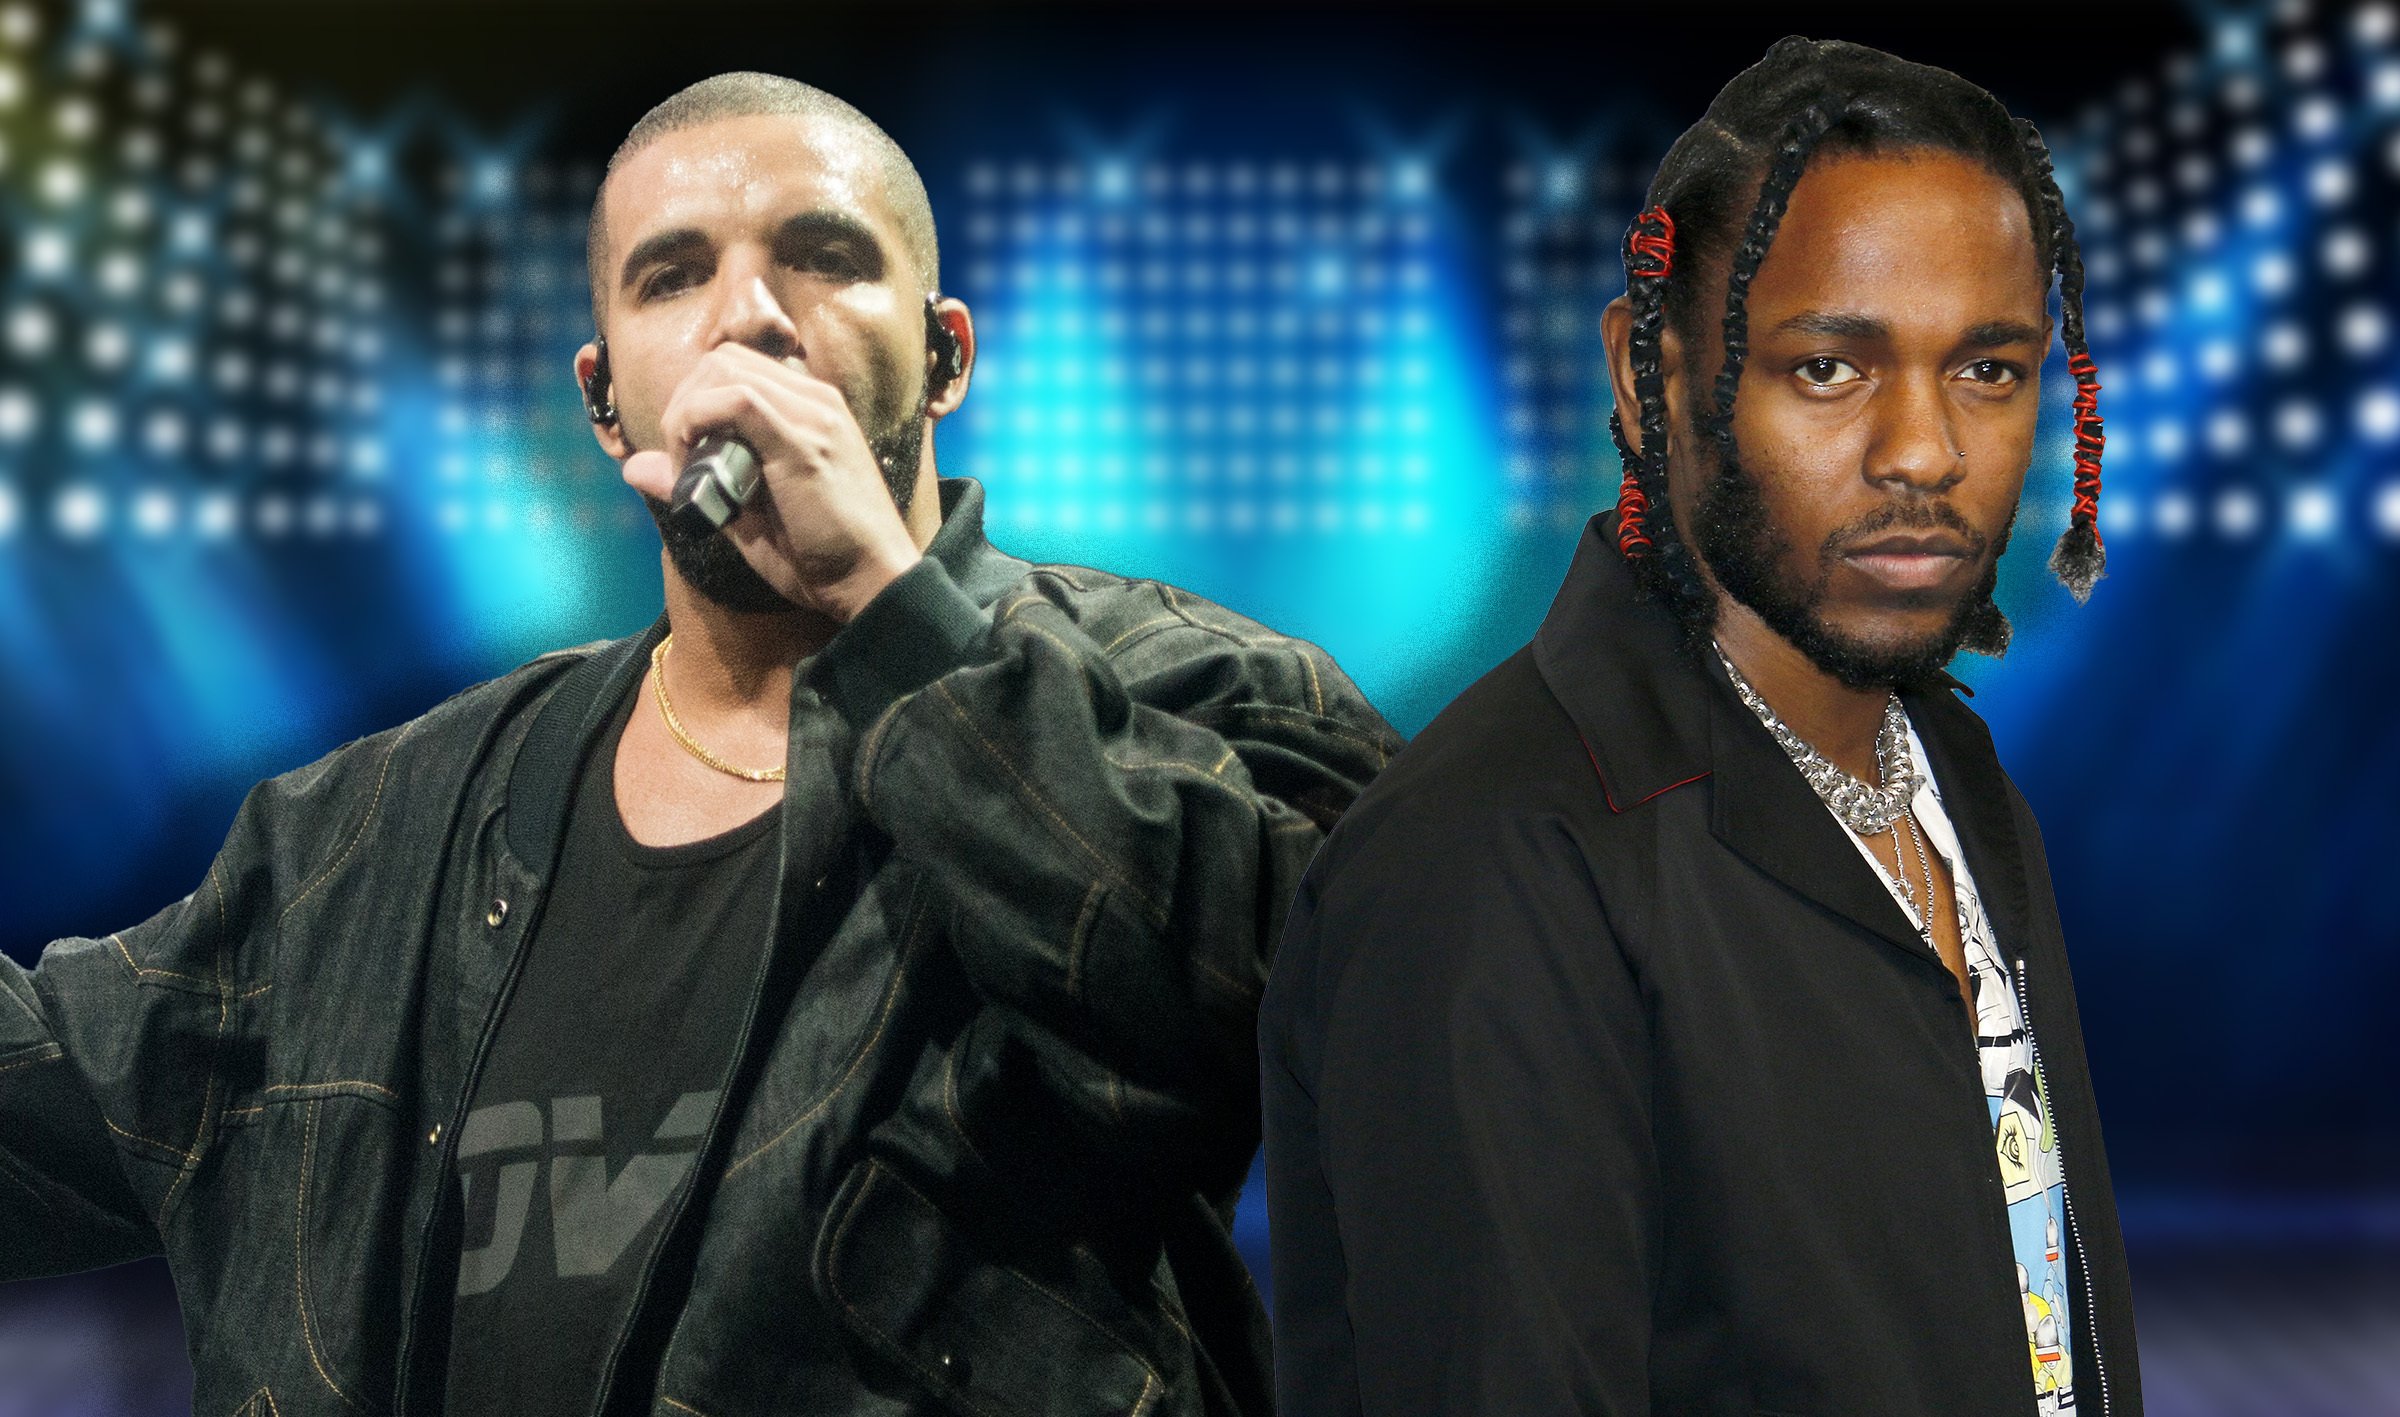 'Ghosts or AI?': How AI Has Supercharged the Drake vs. Kendrick Lamar Rap Beef